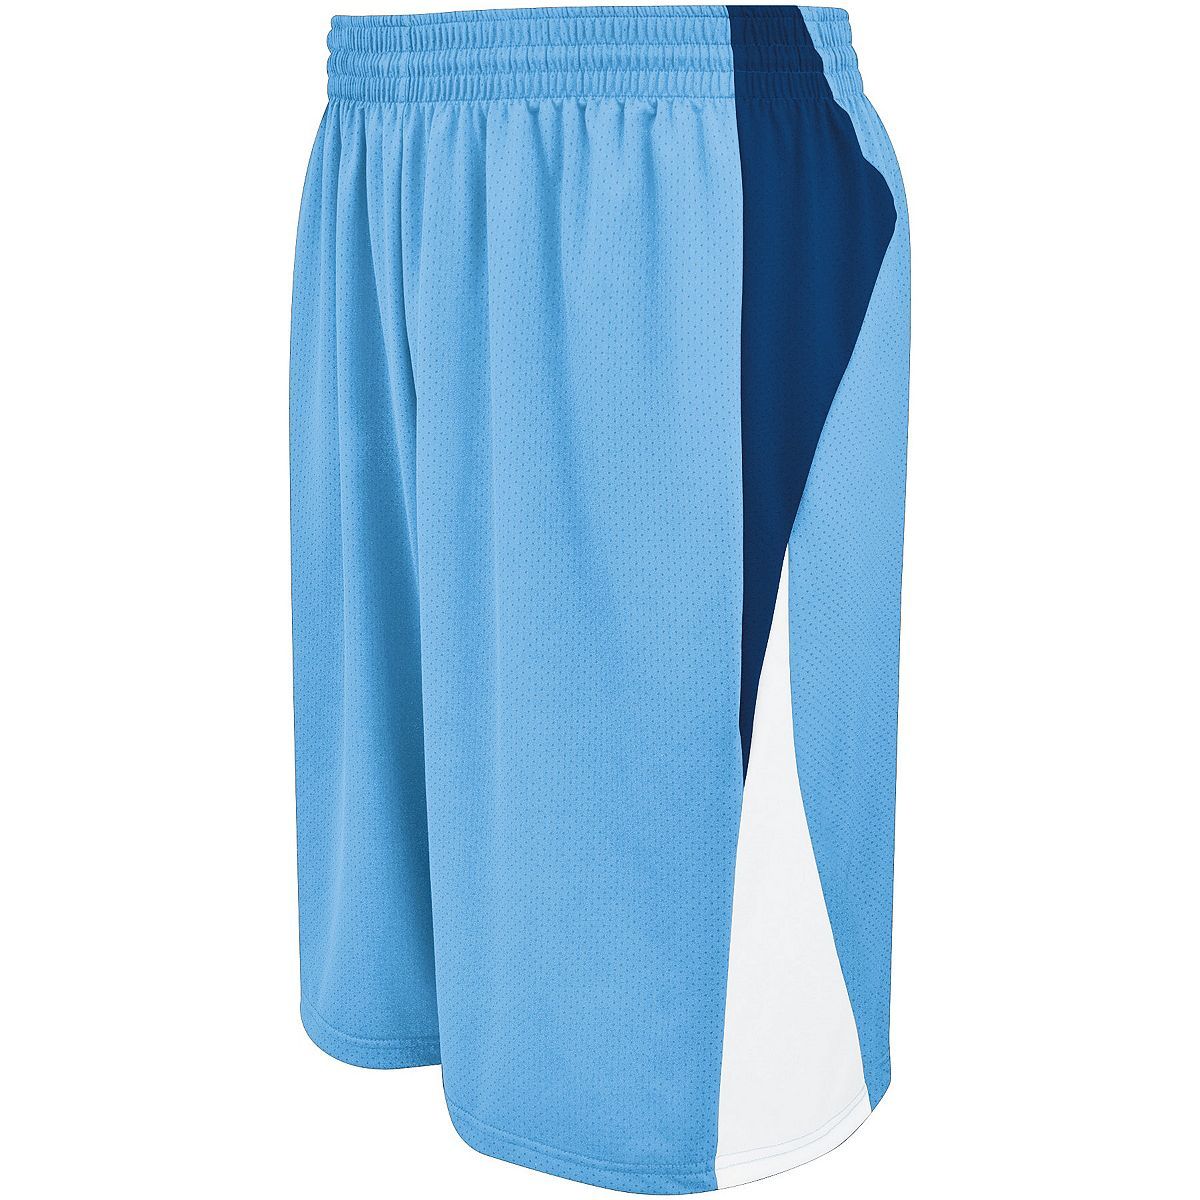 Holloway Campus Reversible Shorts in Columbia Blue/Navy/White  -Part of the Adult, Adult-Shorts, Basketball, Holloway, All-Sports, All-Sports-1 product lines at KanaleyCreations.com